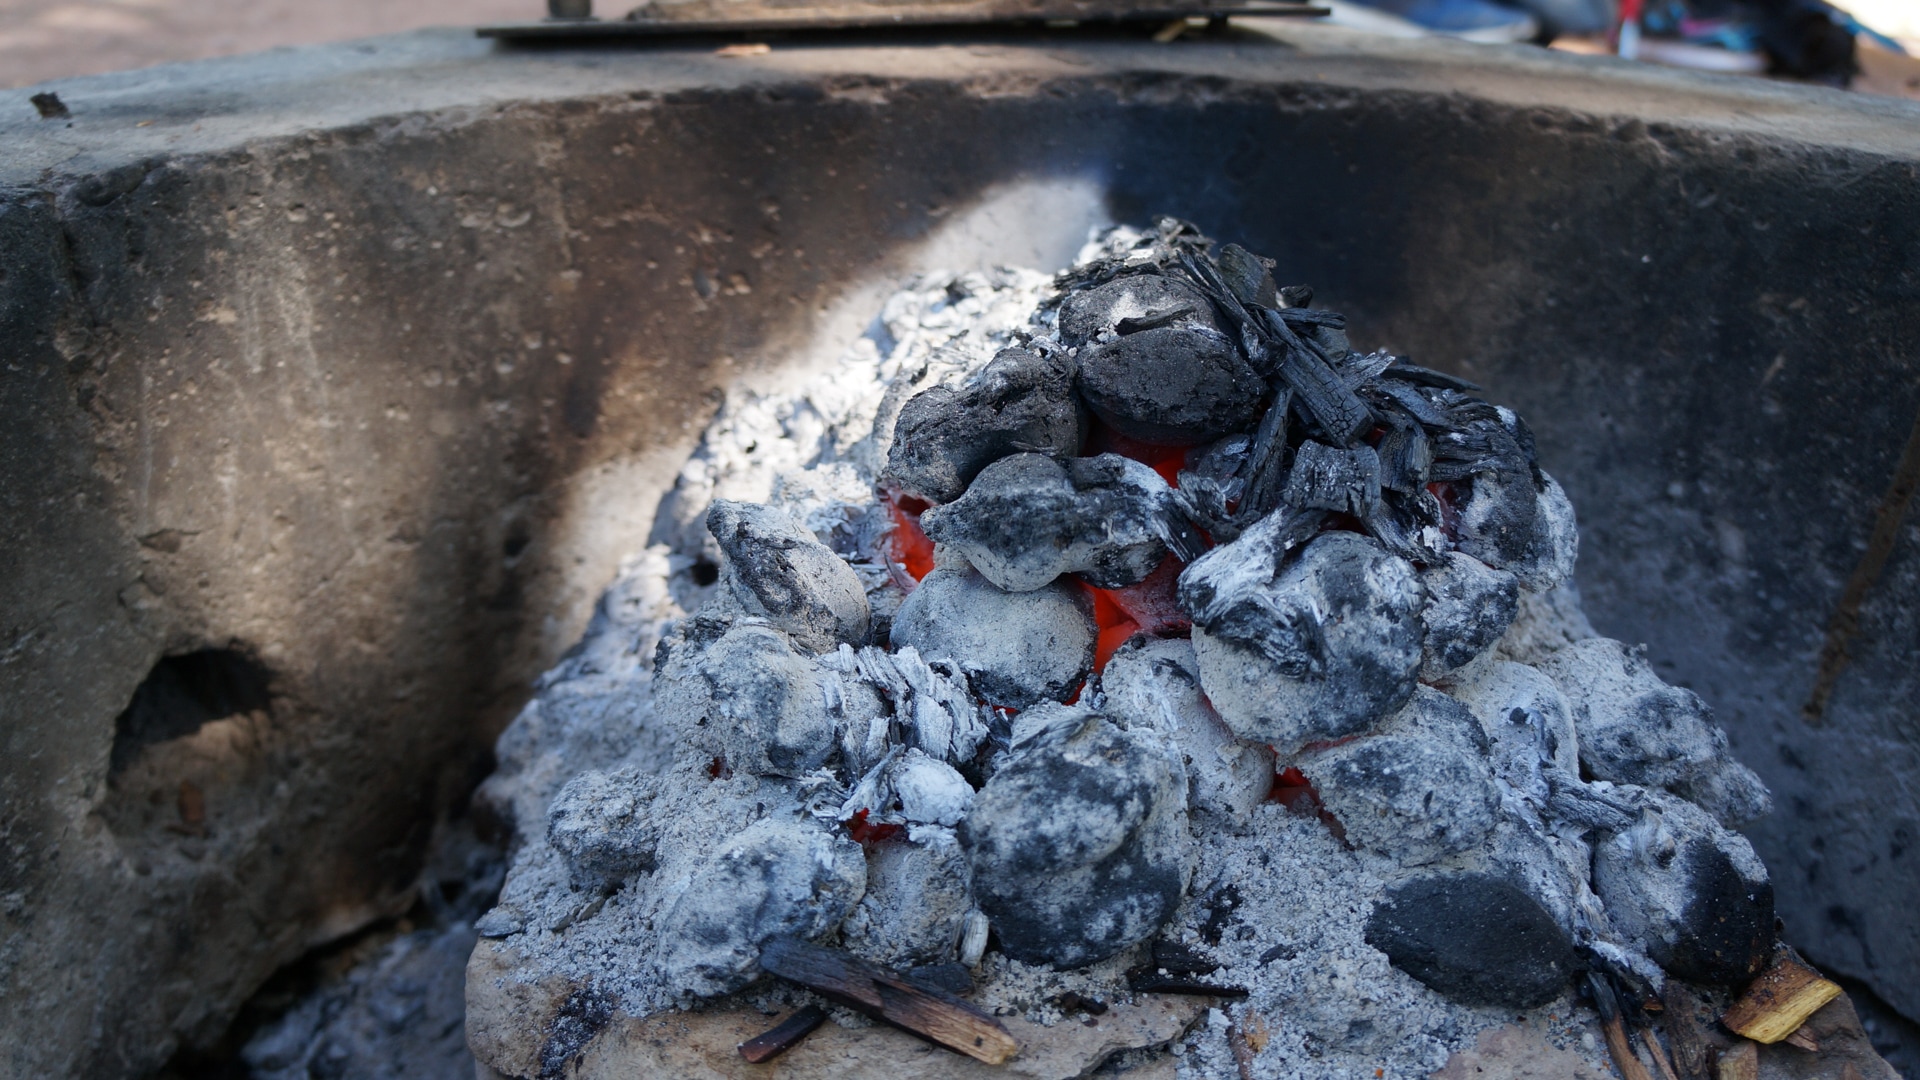 Roasted over coals mixed with Hickory wood chips for a nice smoky flavor.